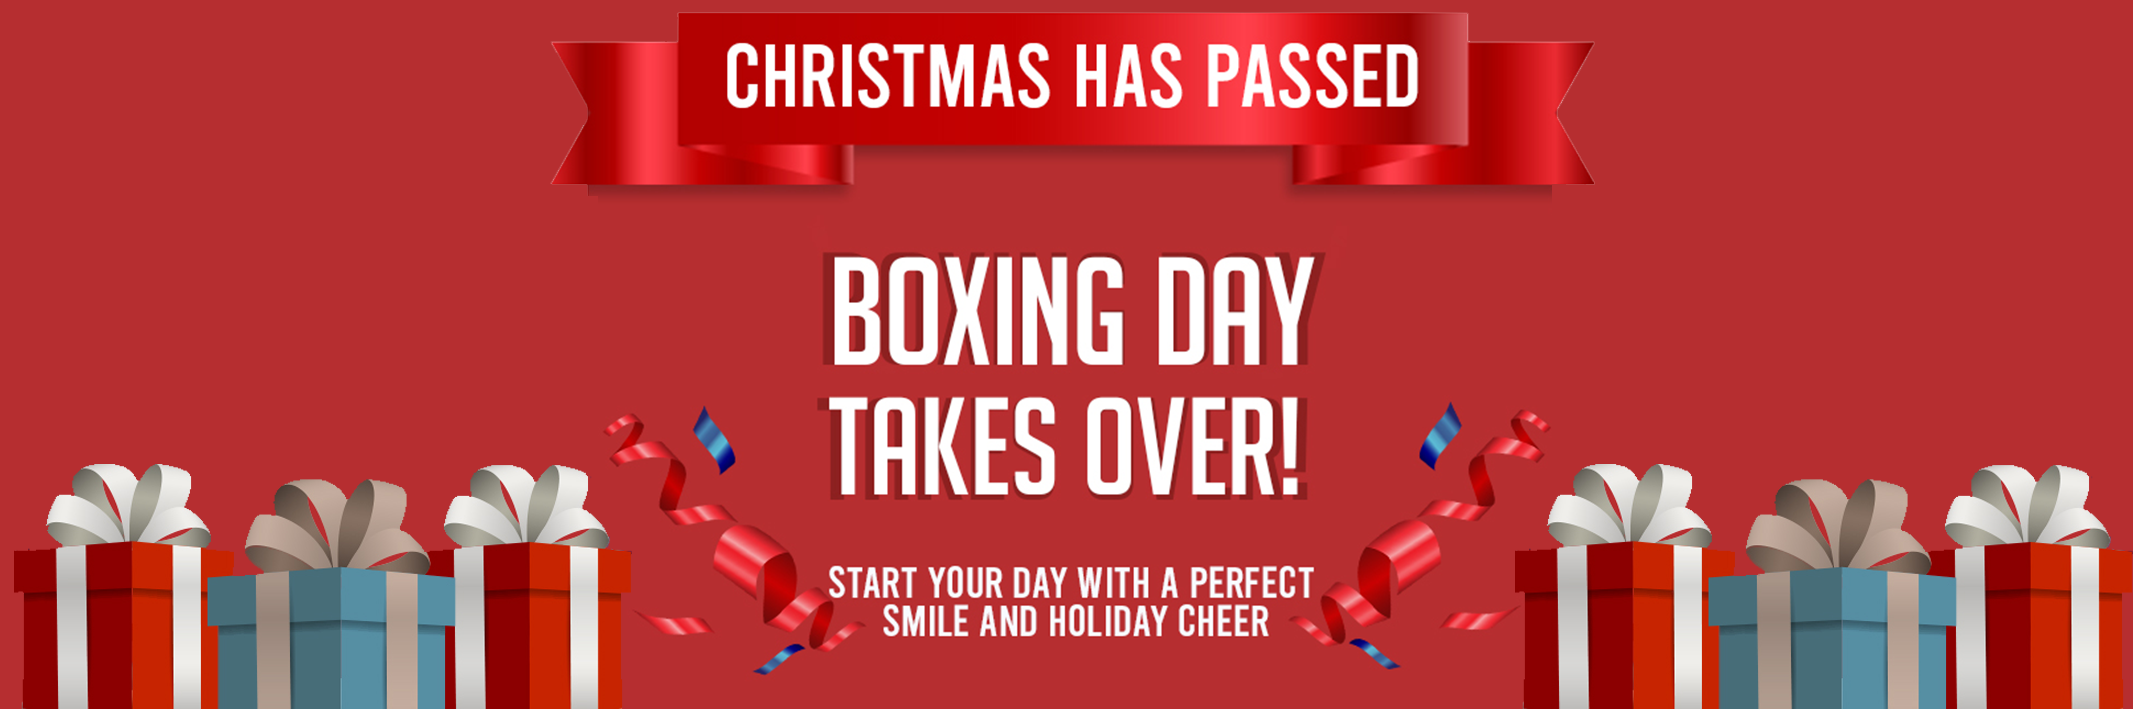 Happy Boxing Day